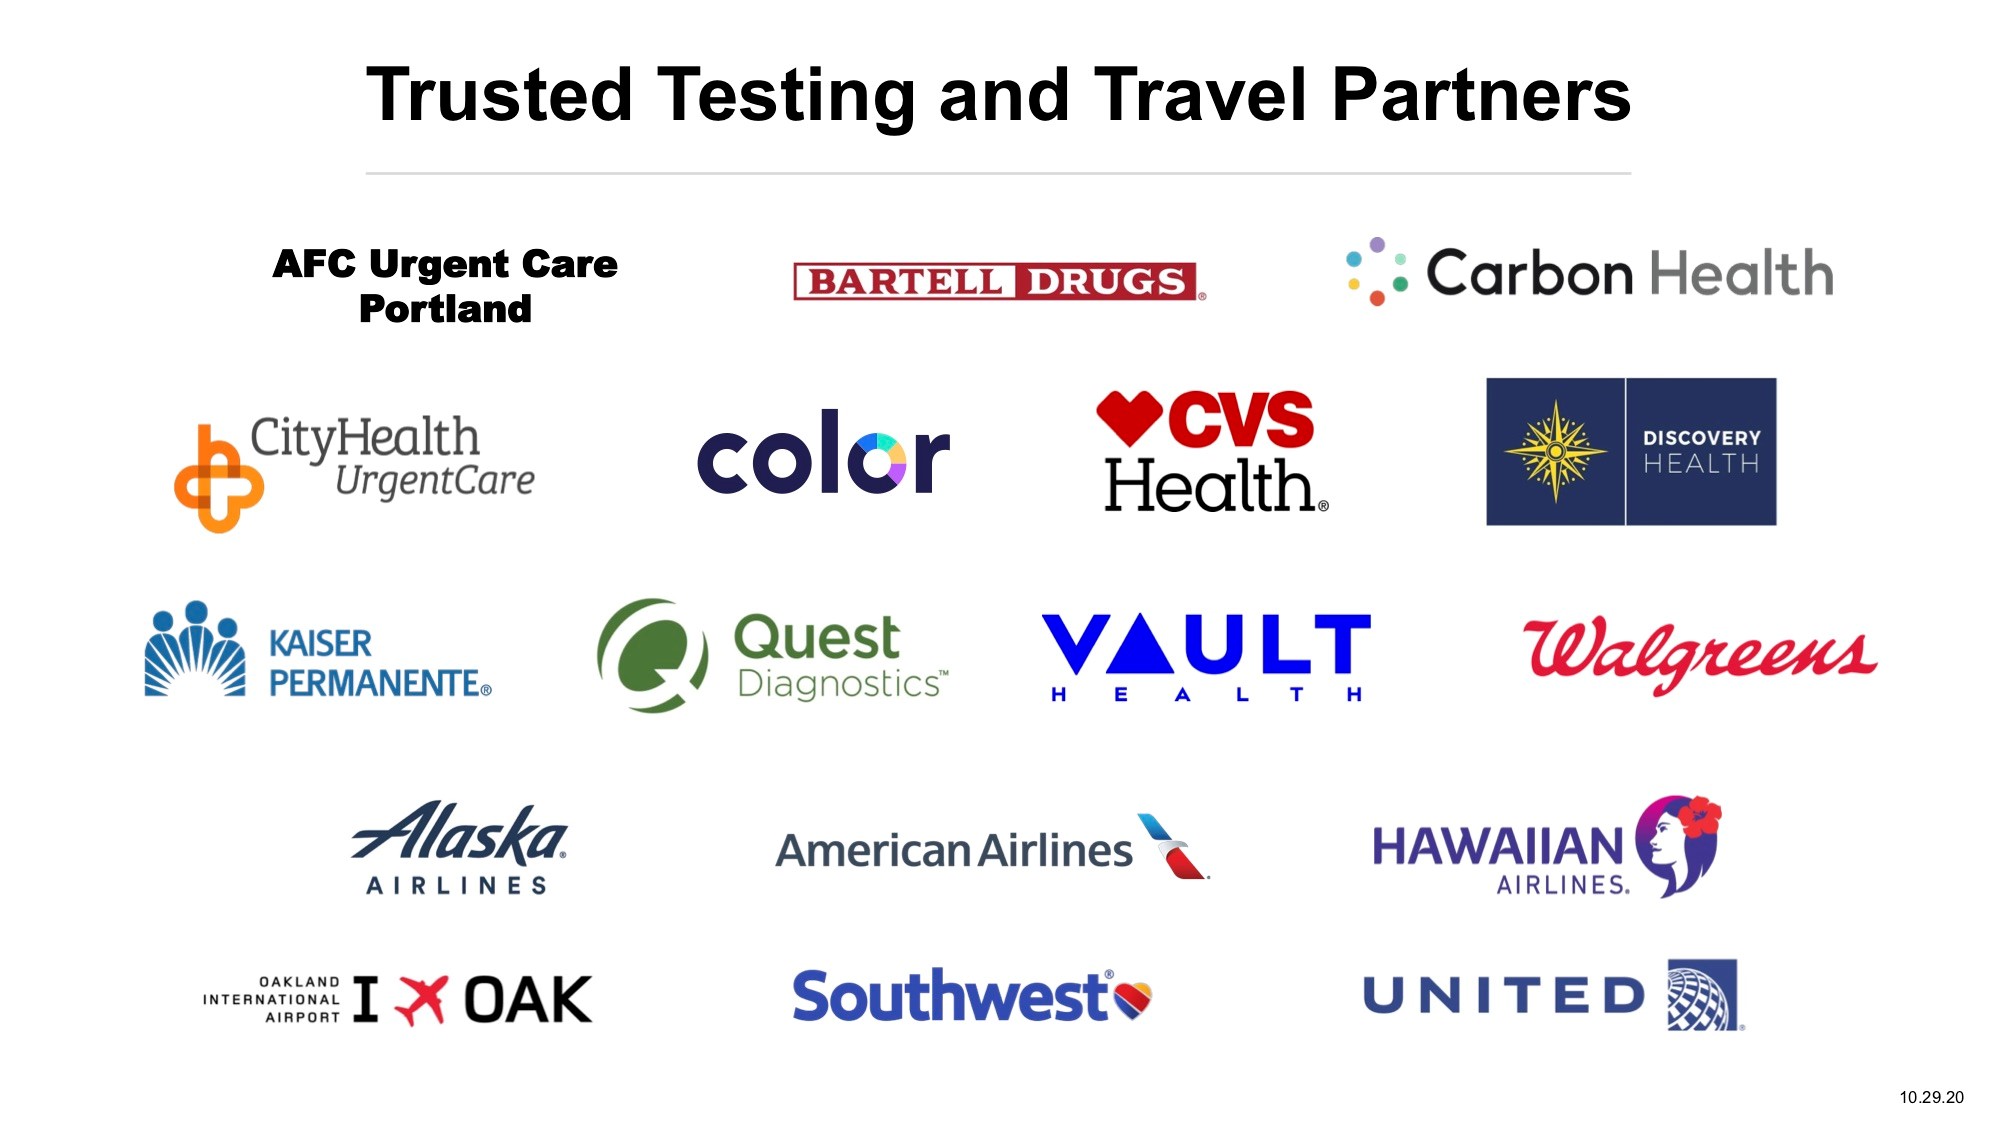 Trusted Testing and Travel Partners - Nov 4 2020